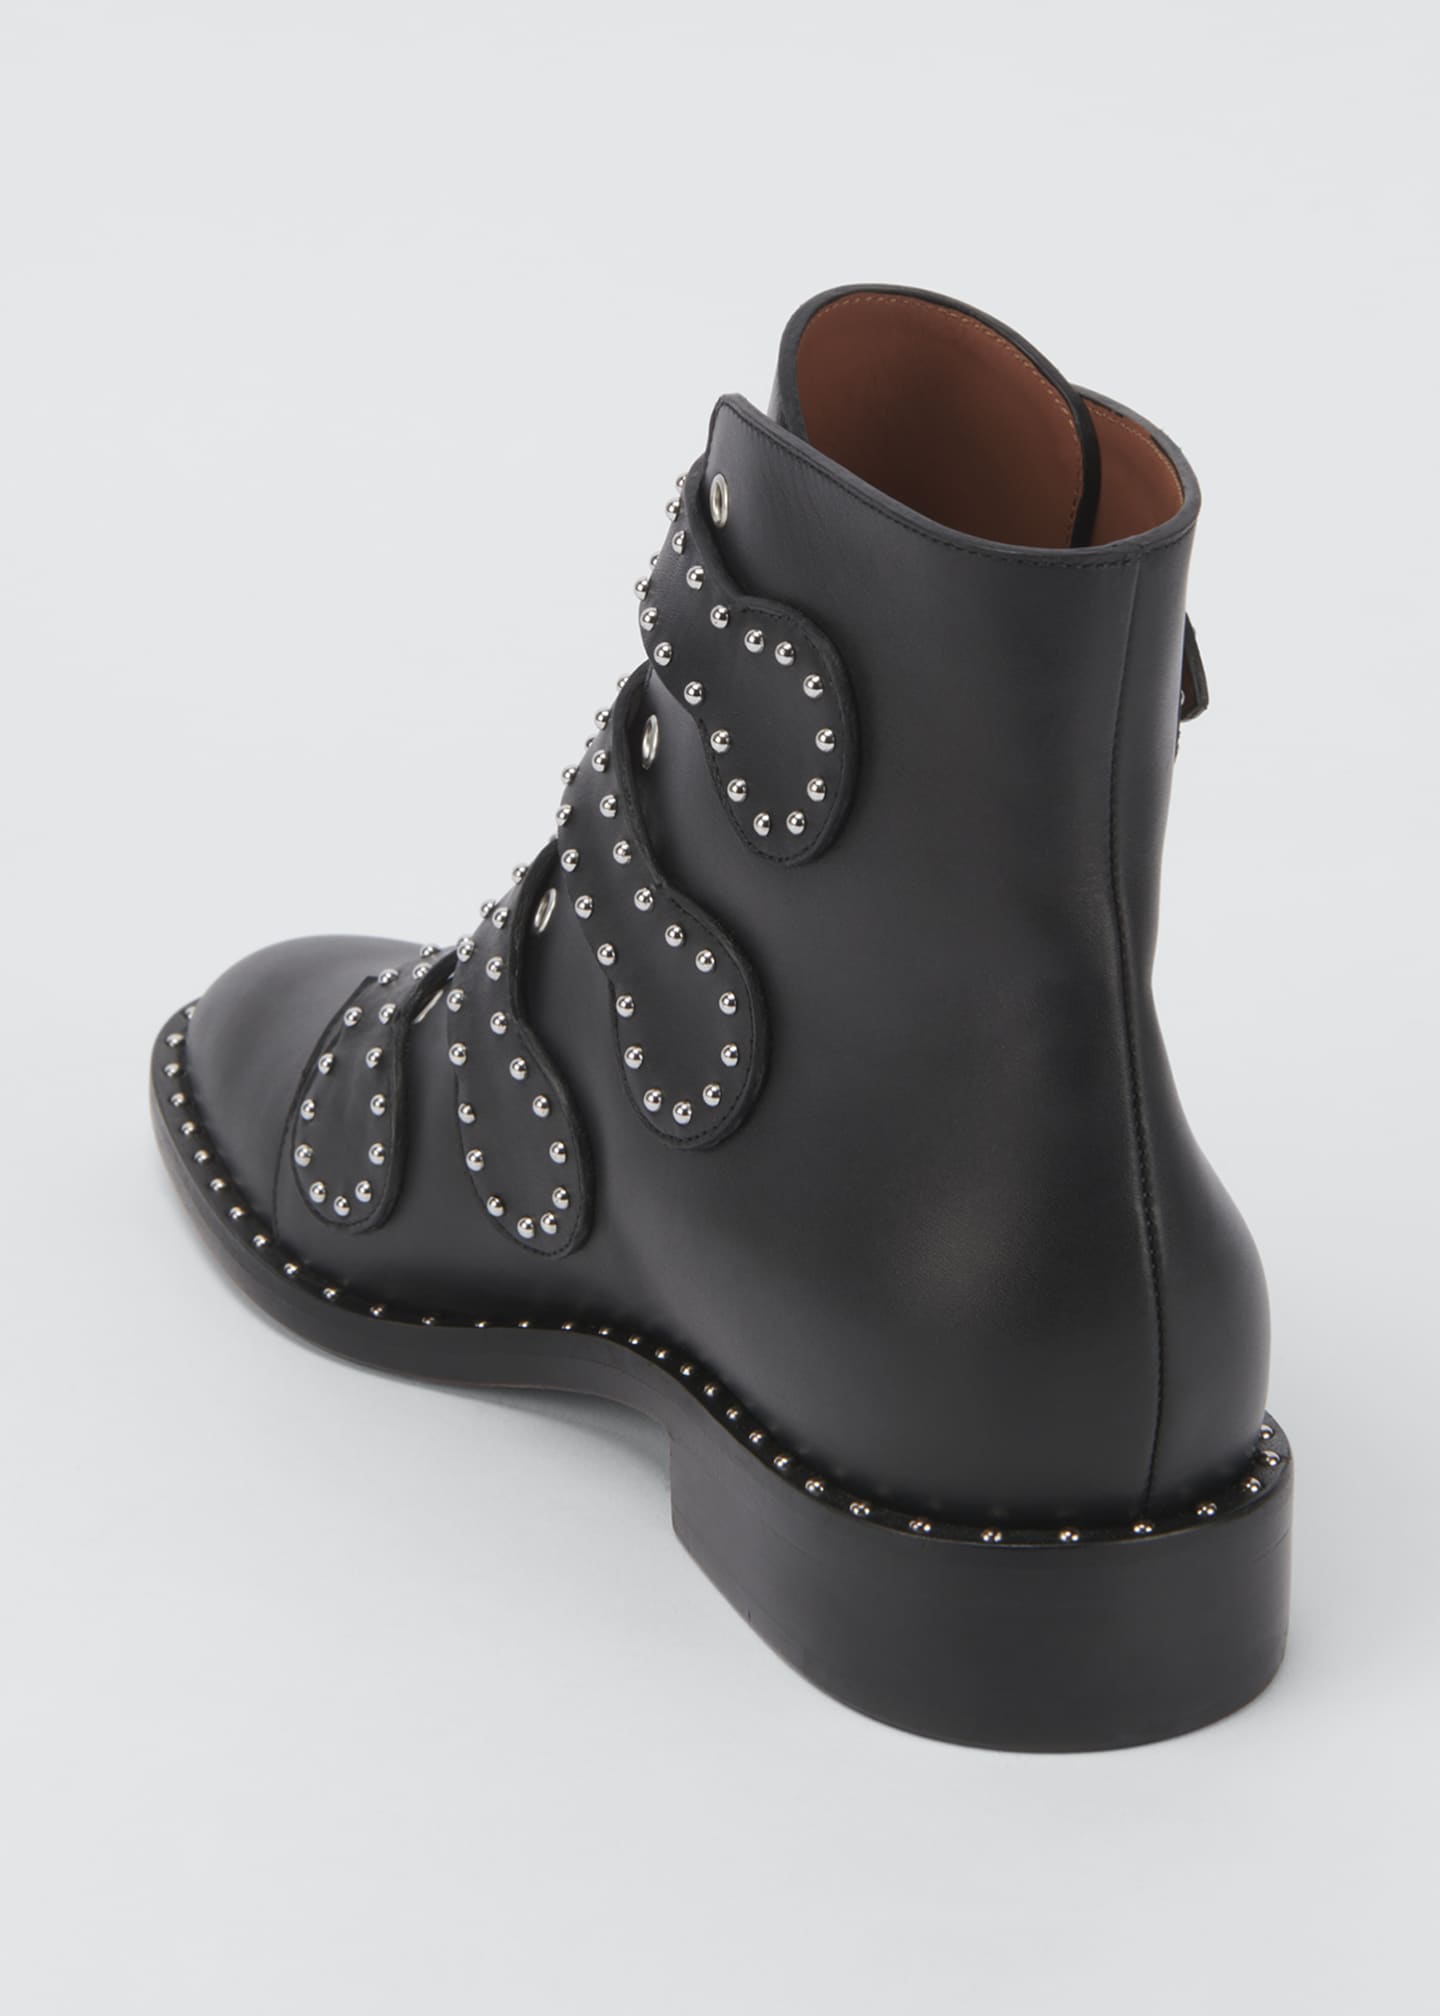 Givenchy Studded Leather Ankle Boot - Bergdorf Goodman